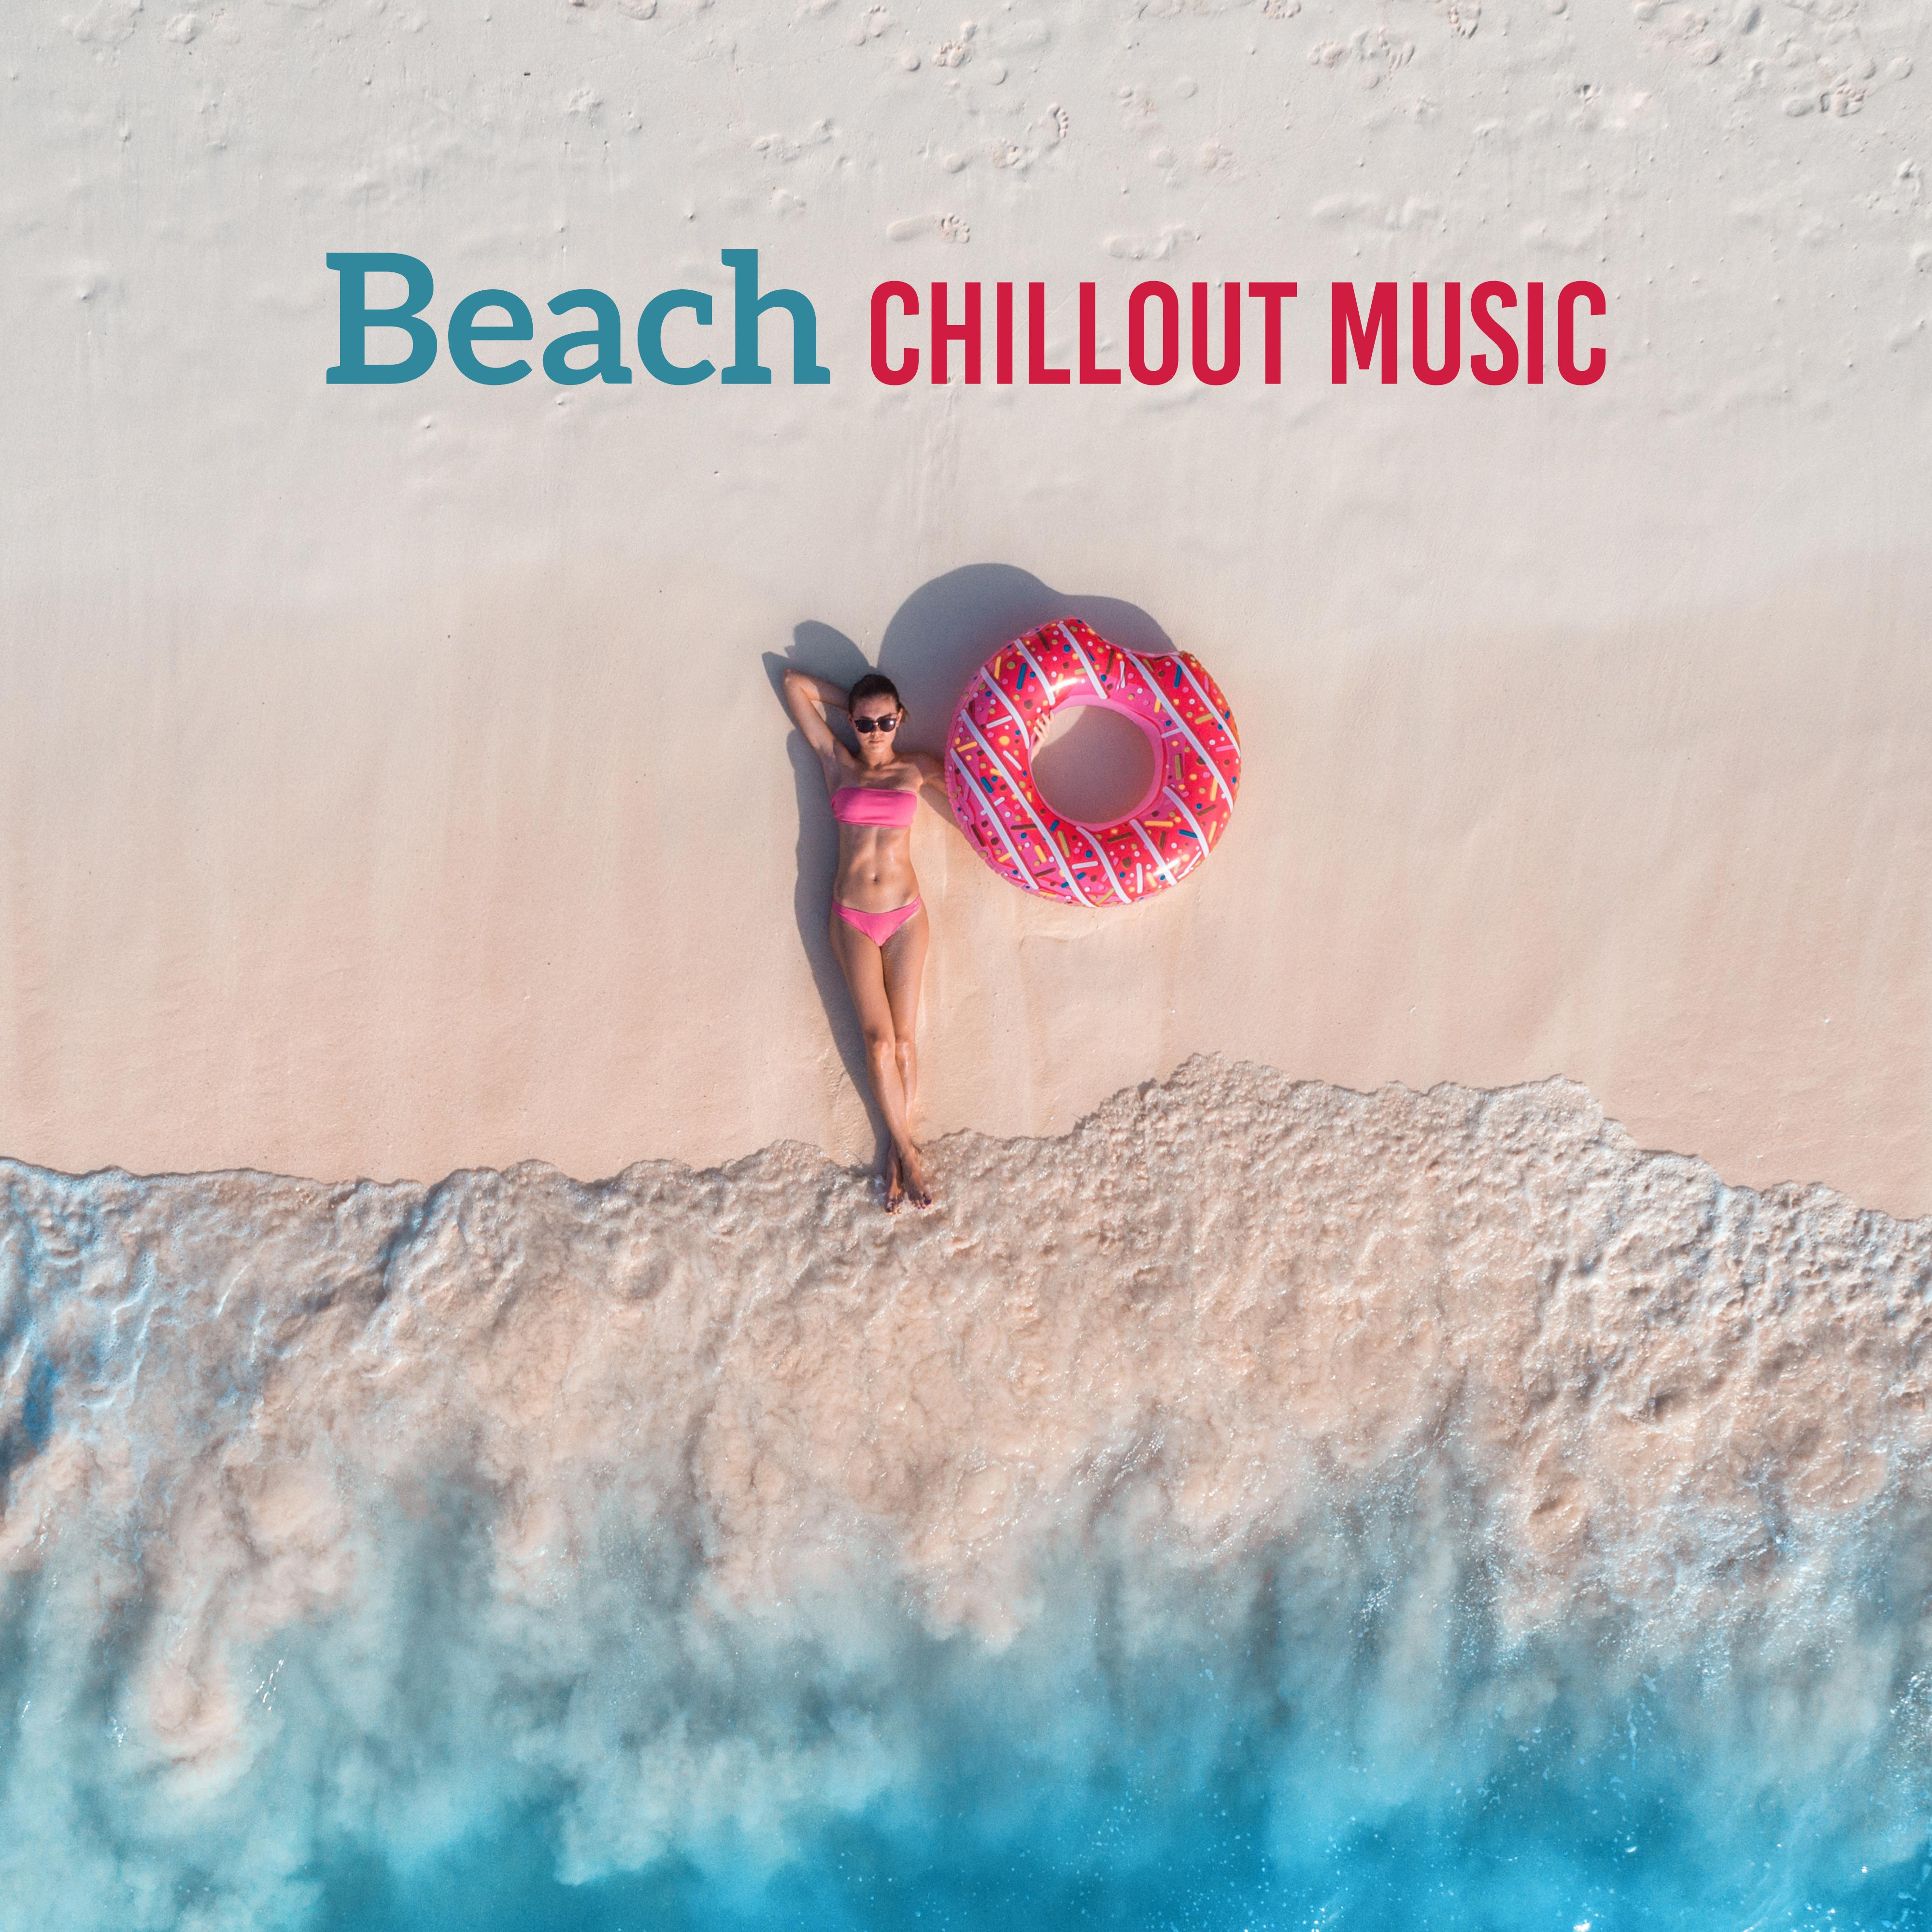 Beach Chillout Music – Summertime 2019, Deep Relax, Beach Music, Music Zone, Calm Down, Perfect Relax, Ibiza Chill Out